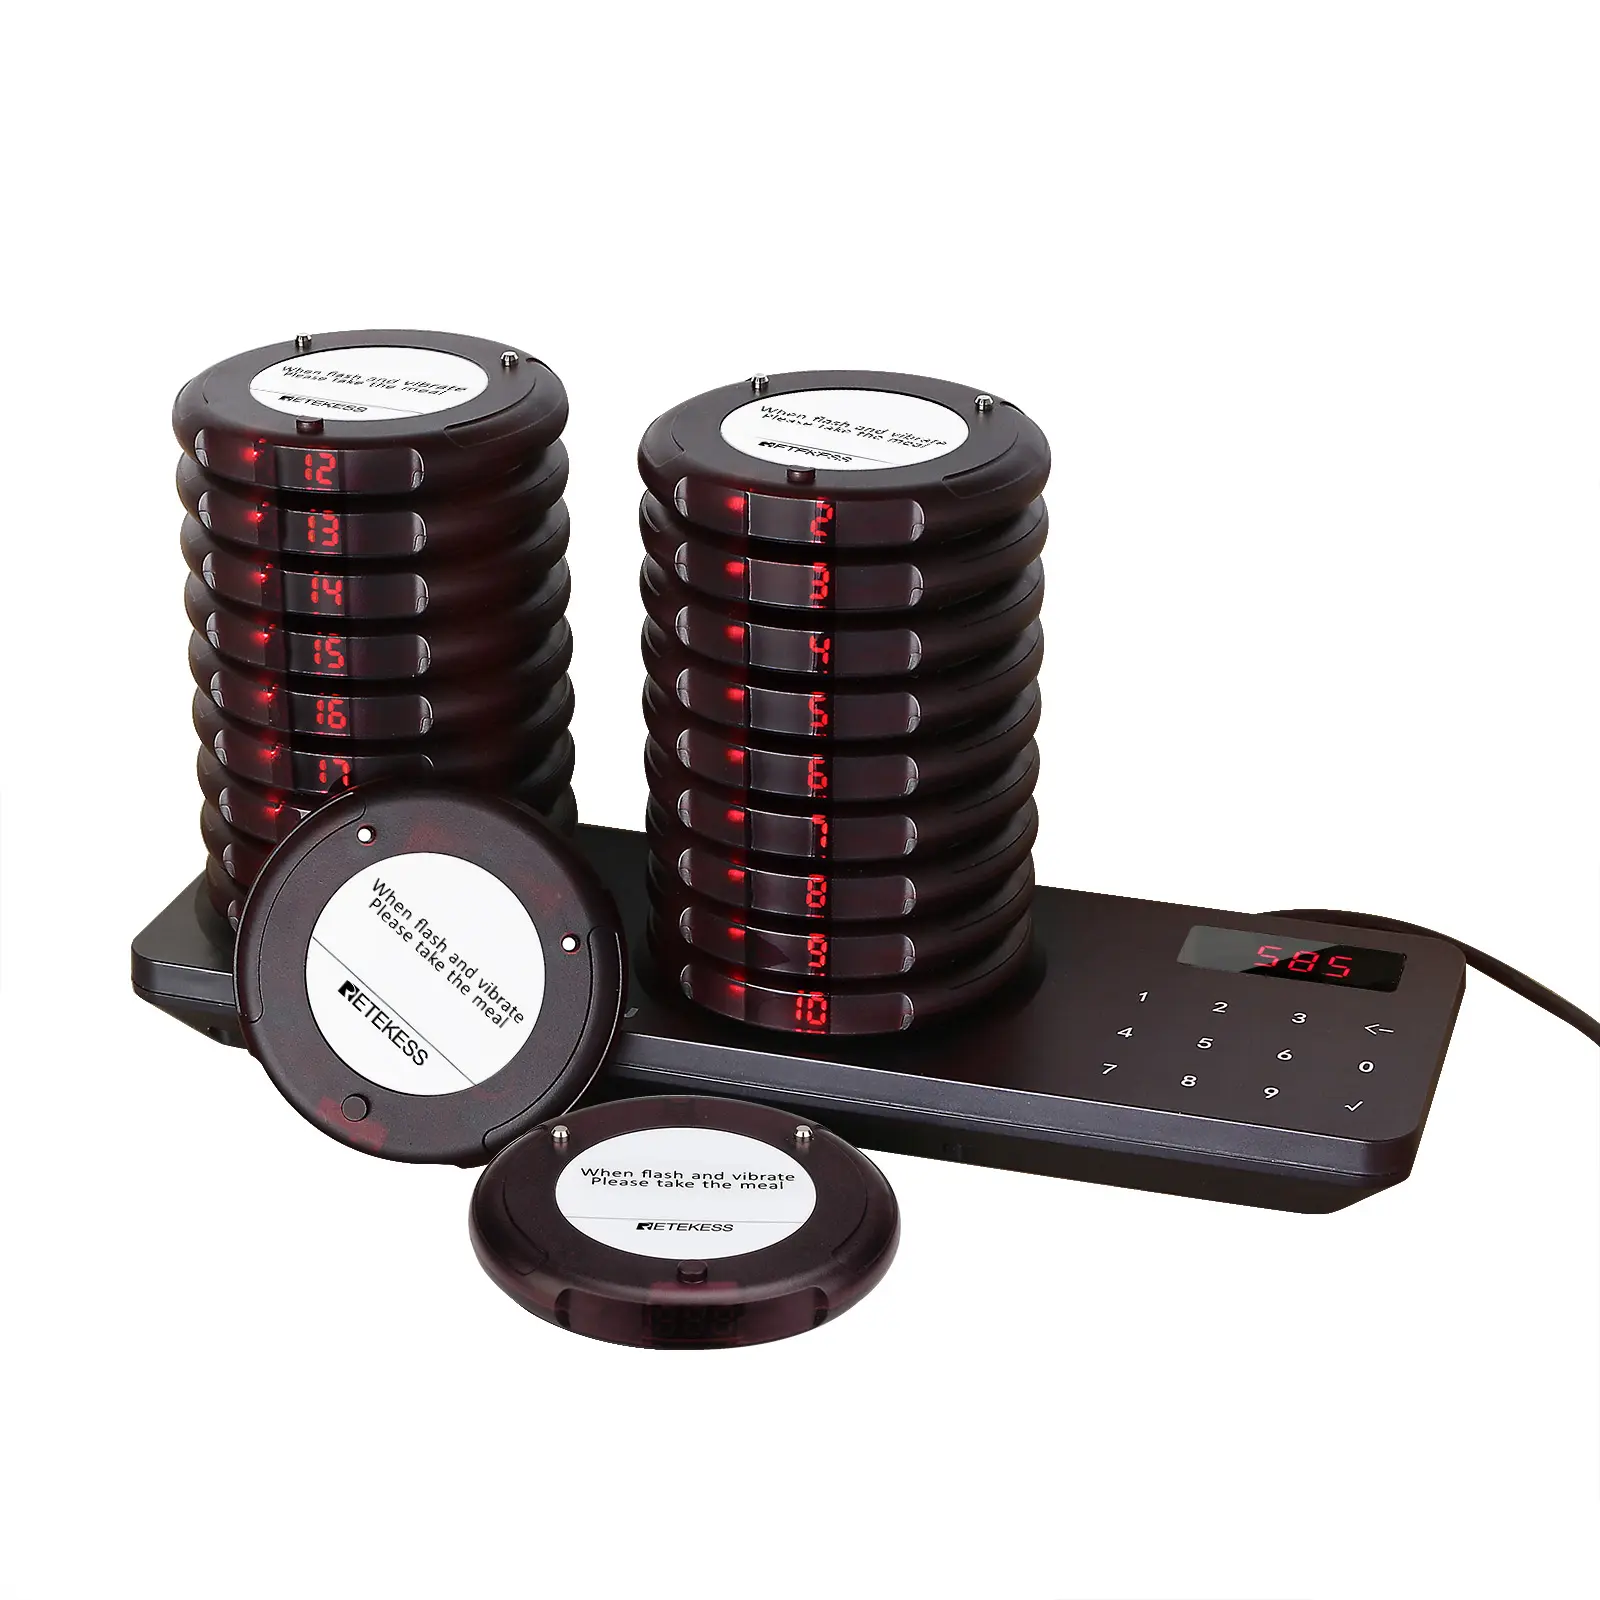 Wireless restaurant table ordering system 20 Coaster Pagers buzzers for Gourmet Window Milk Tea Shop Dining Car Retekess TD163